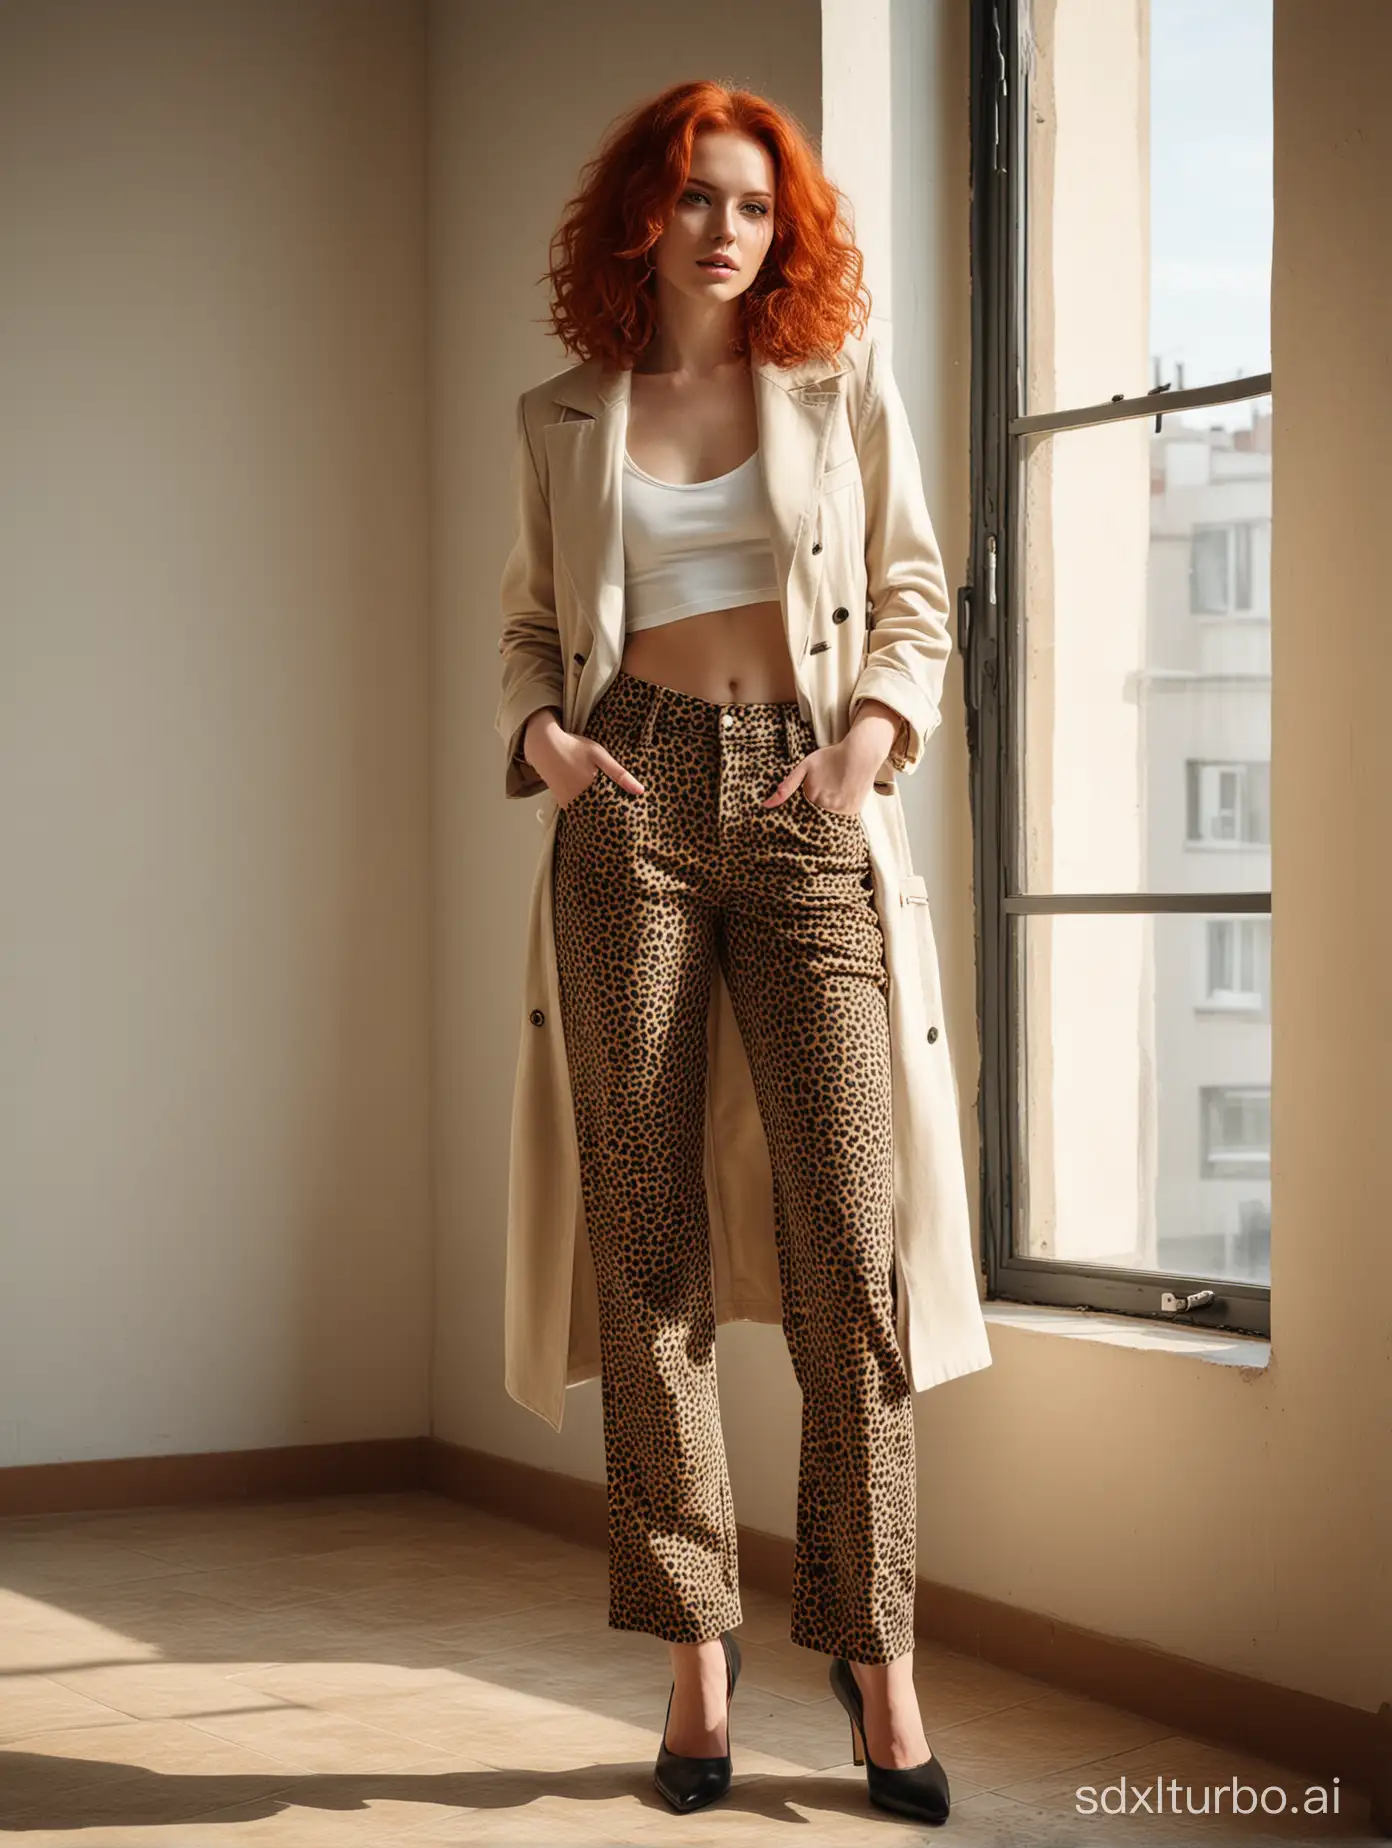 Stylish-RedHaired-Woman-Posing-in-Leopard-Print-Palazzo-Jeans-and-Beige-Coat